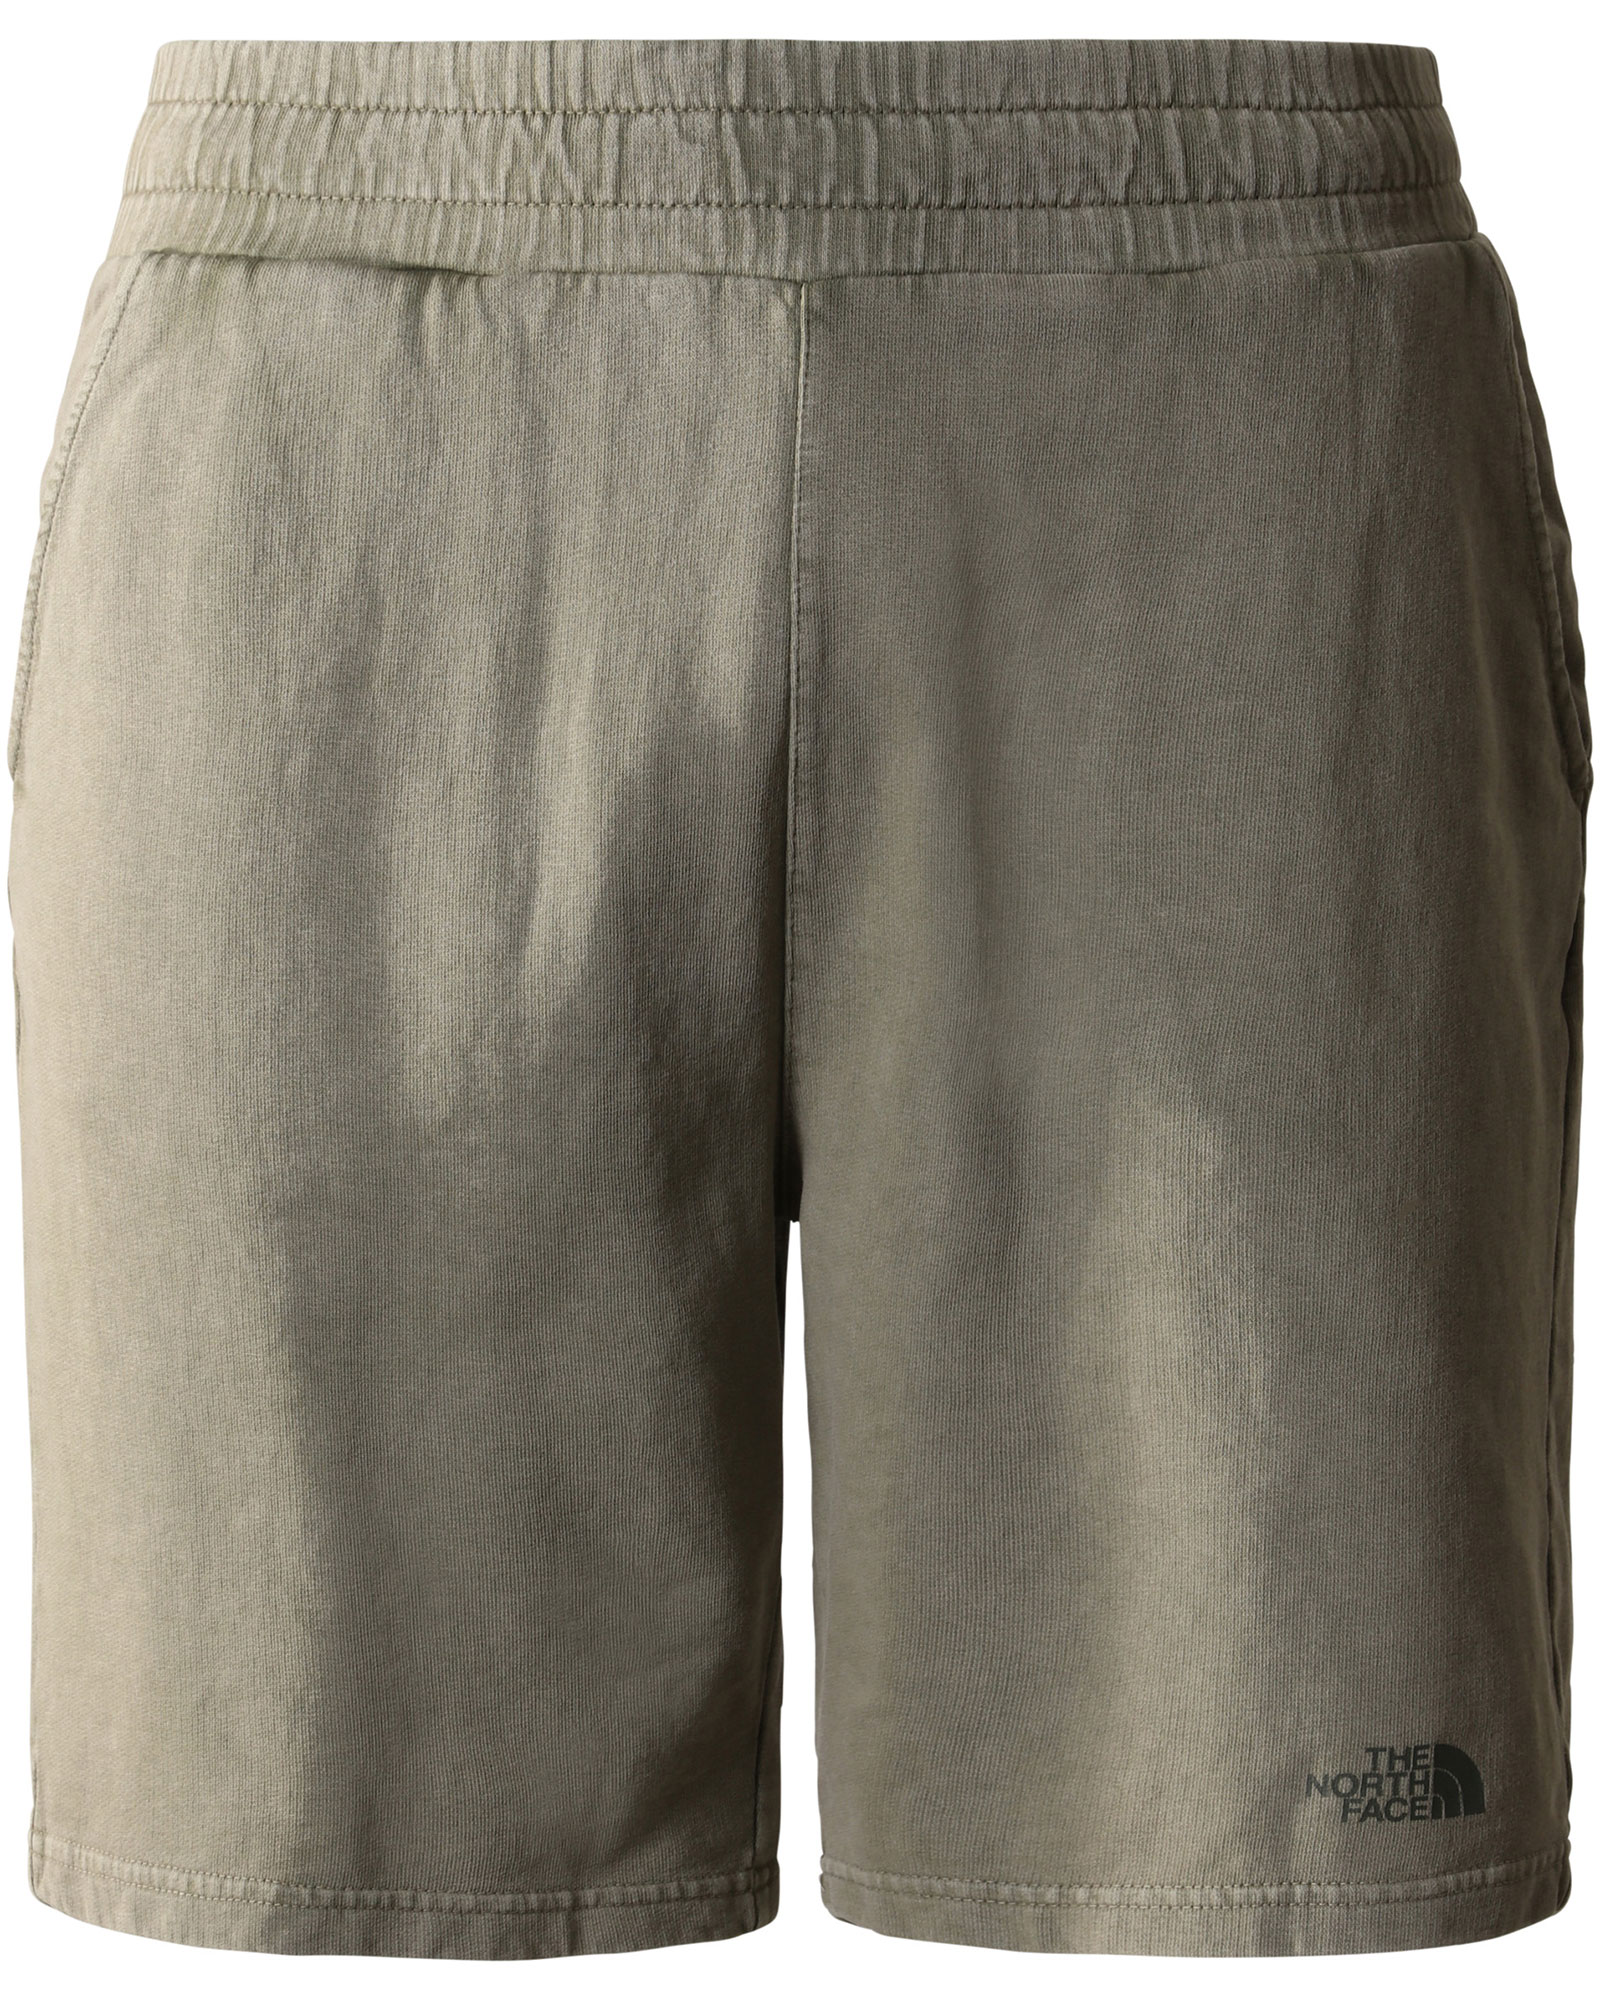 The North Face Men’s Heritage Dye Pack Shorts - New Taupe Green M